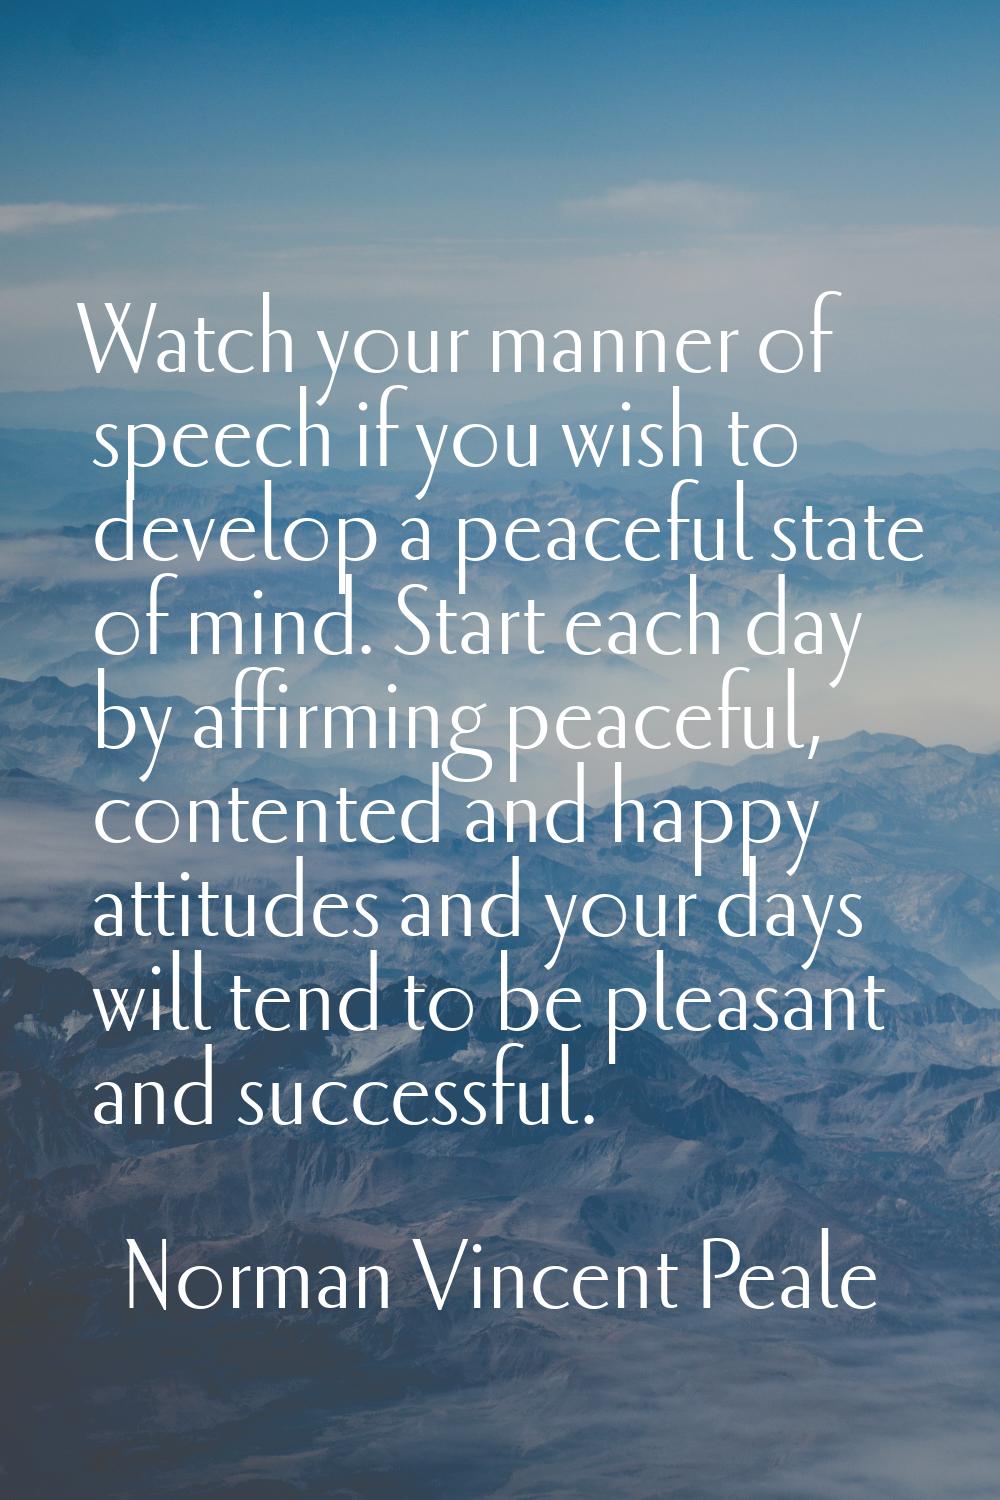 Watch your manner of speech if you wish to develop a peaceful state of mind. Start each day by affi